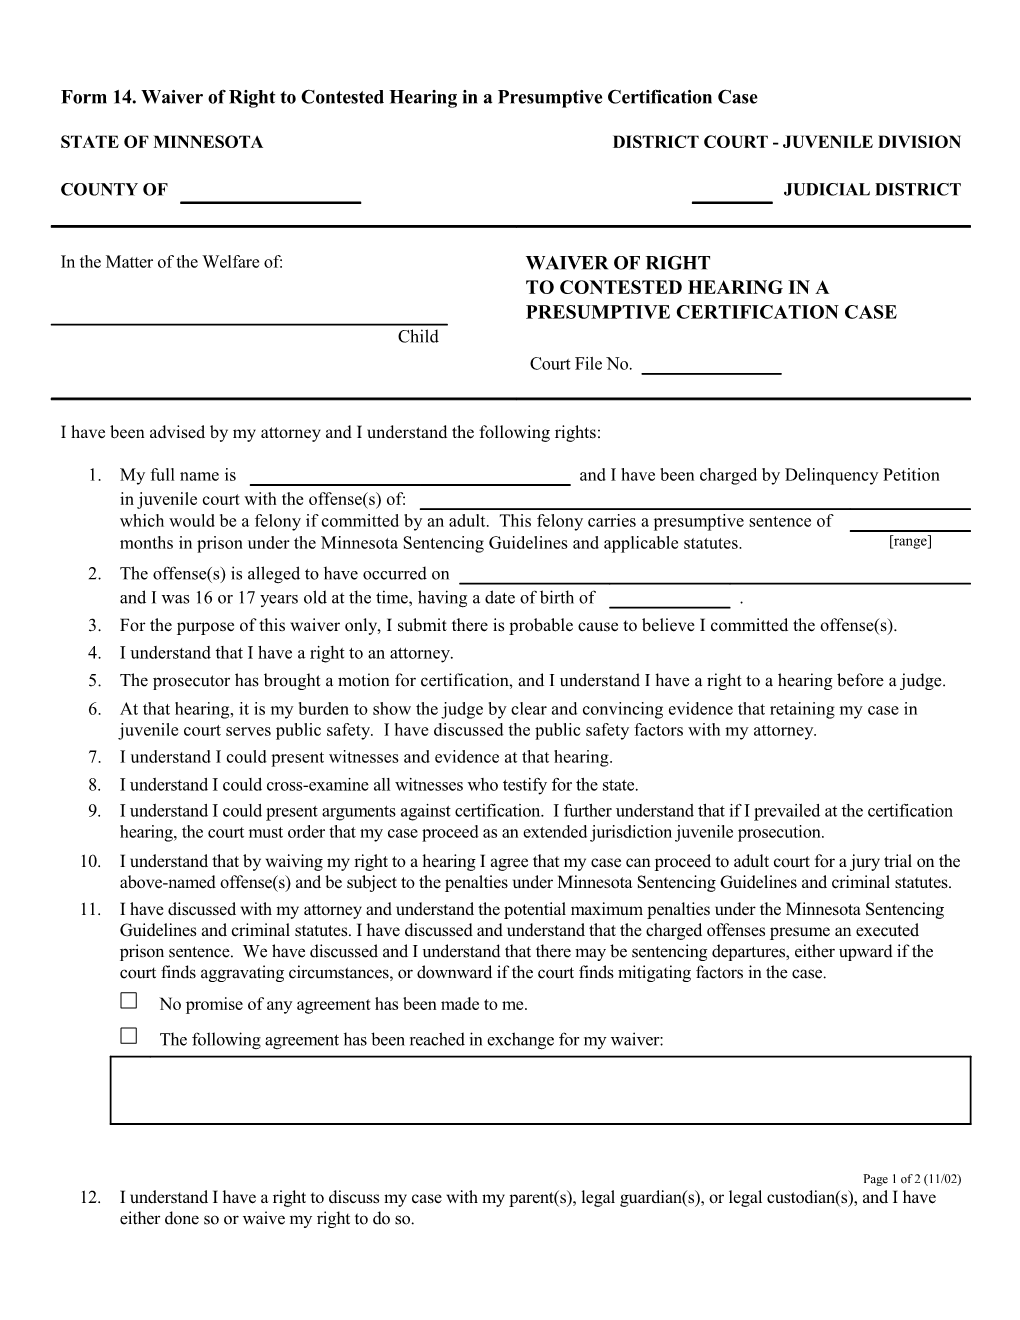 Form 14. Waiver of Right to Contested Hearing in a Presumptive Certification Case